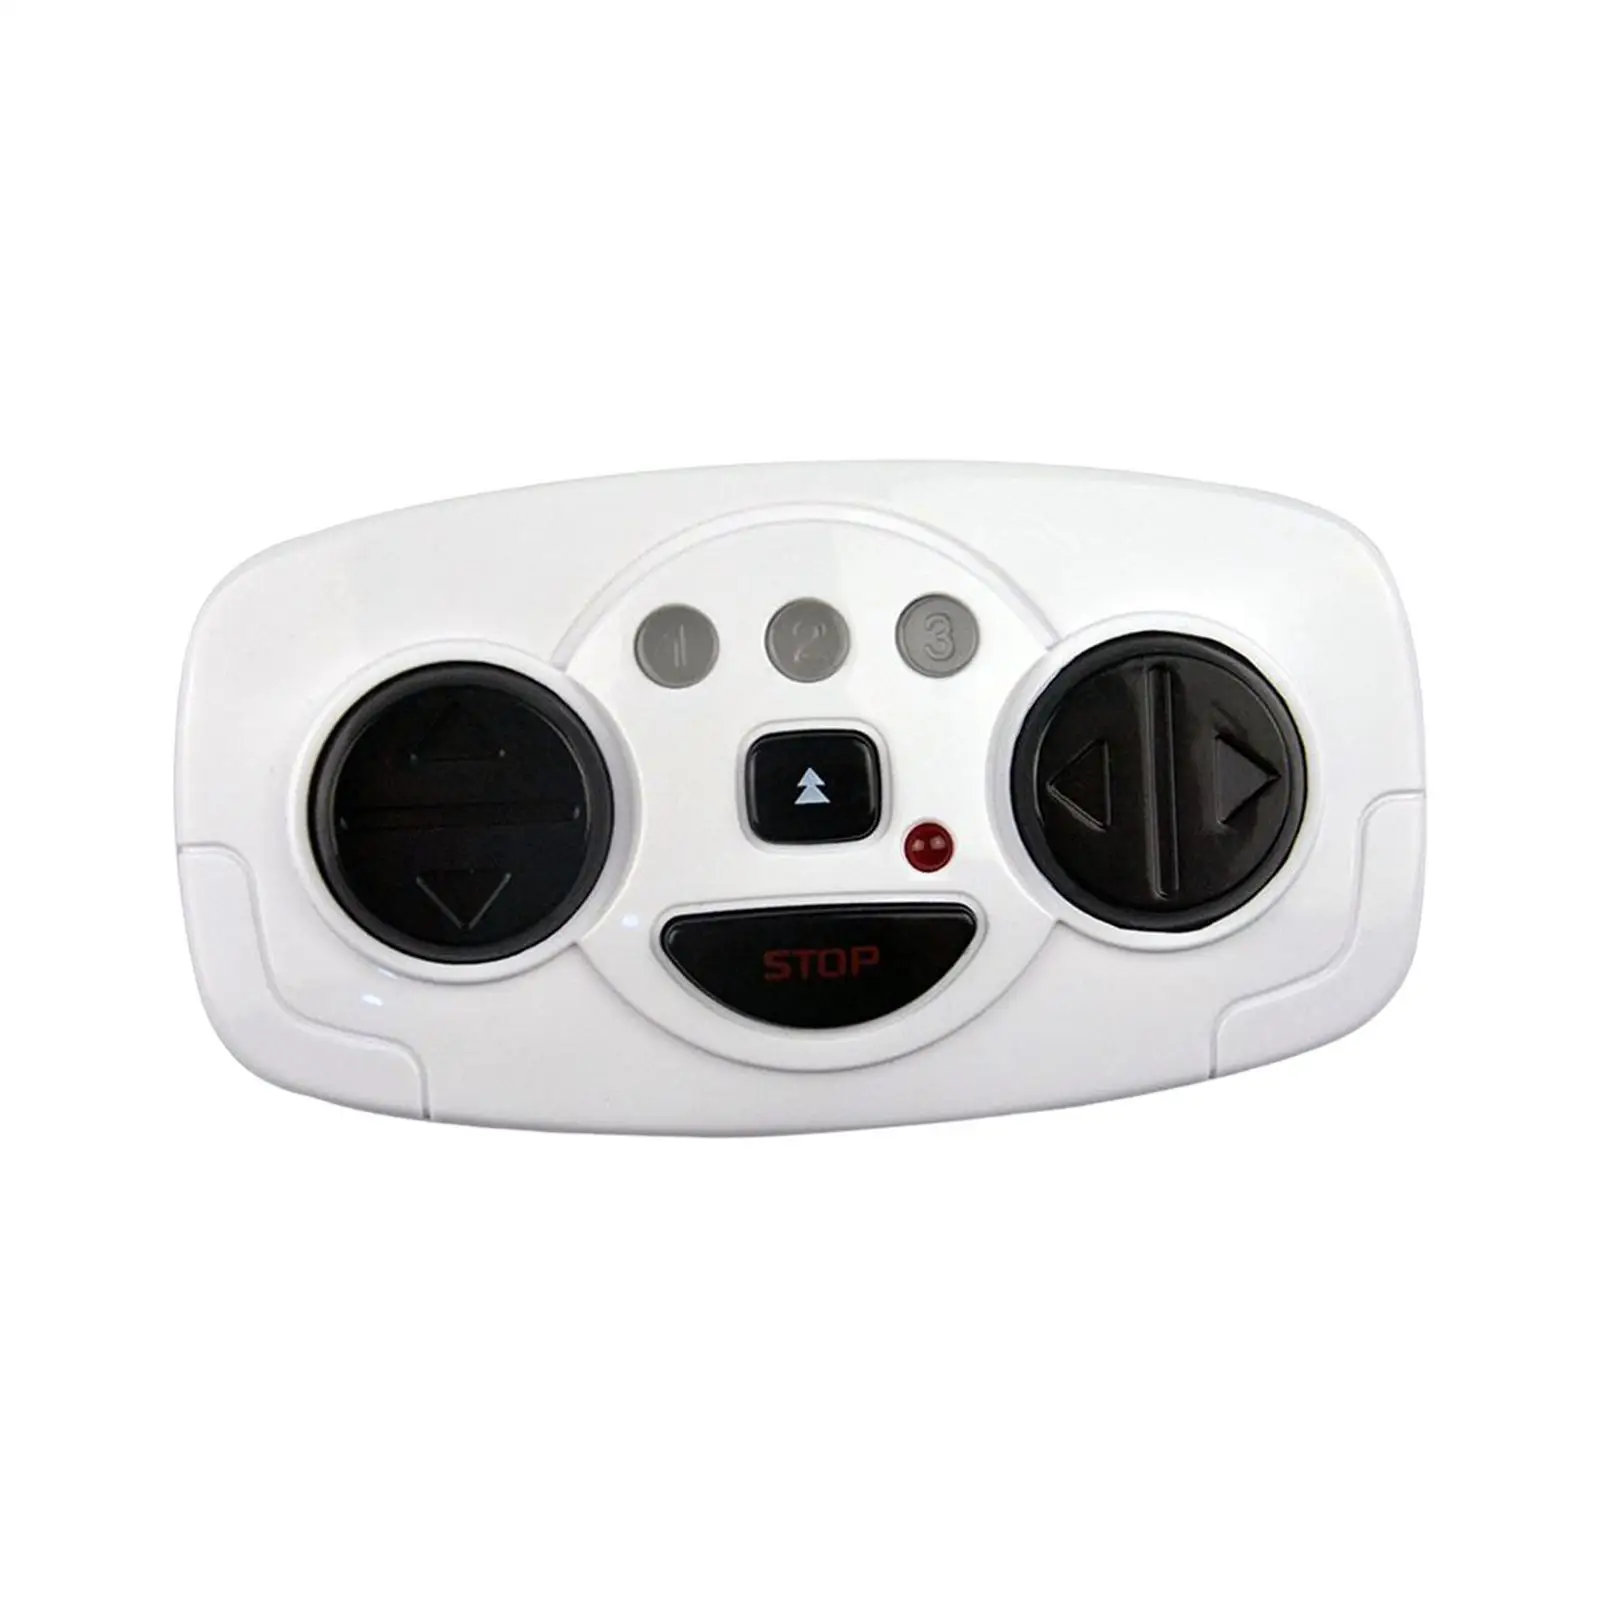 Remote Controller Durable Accessories Parts Fitments for Kids RC Model Cars